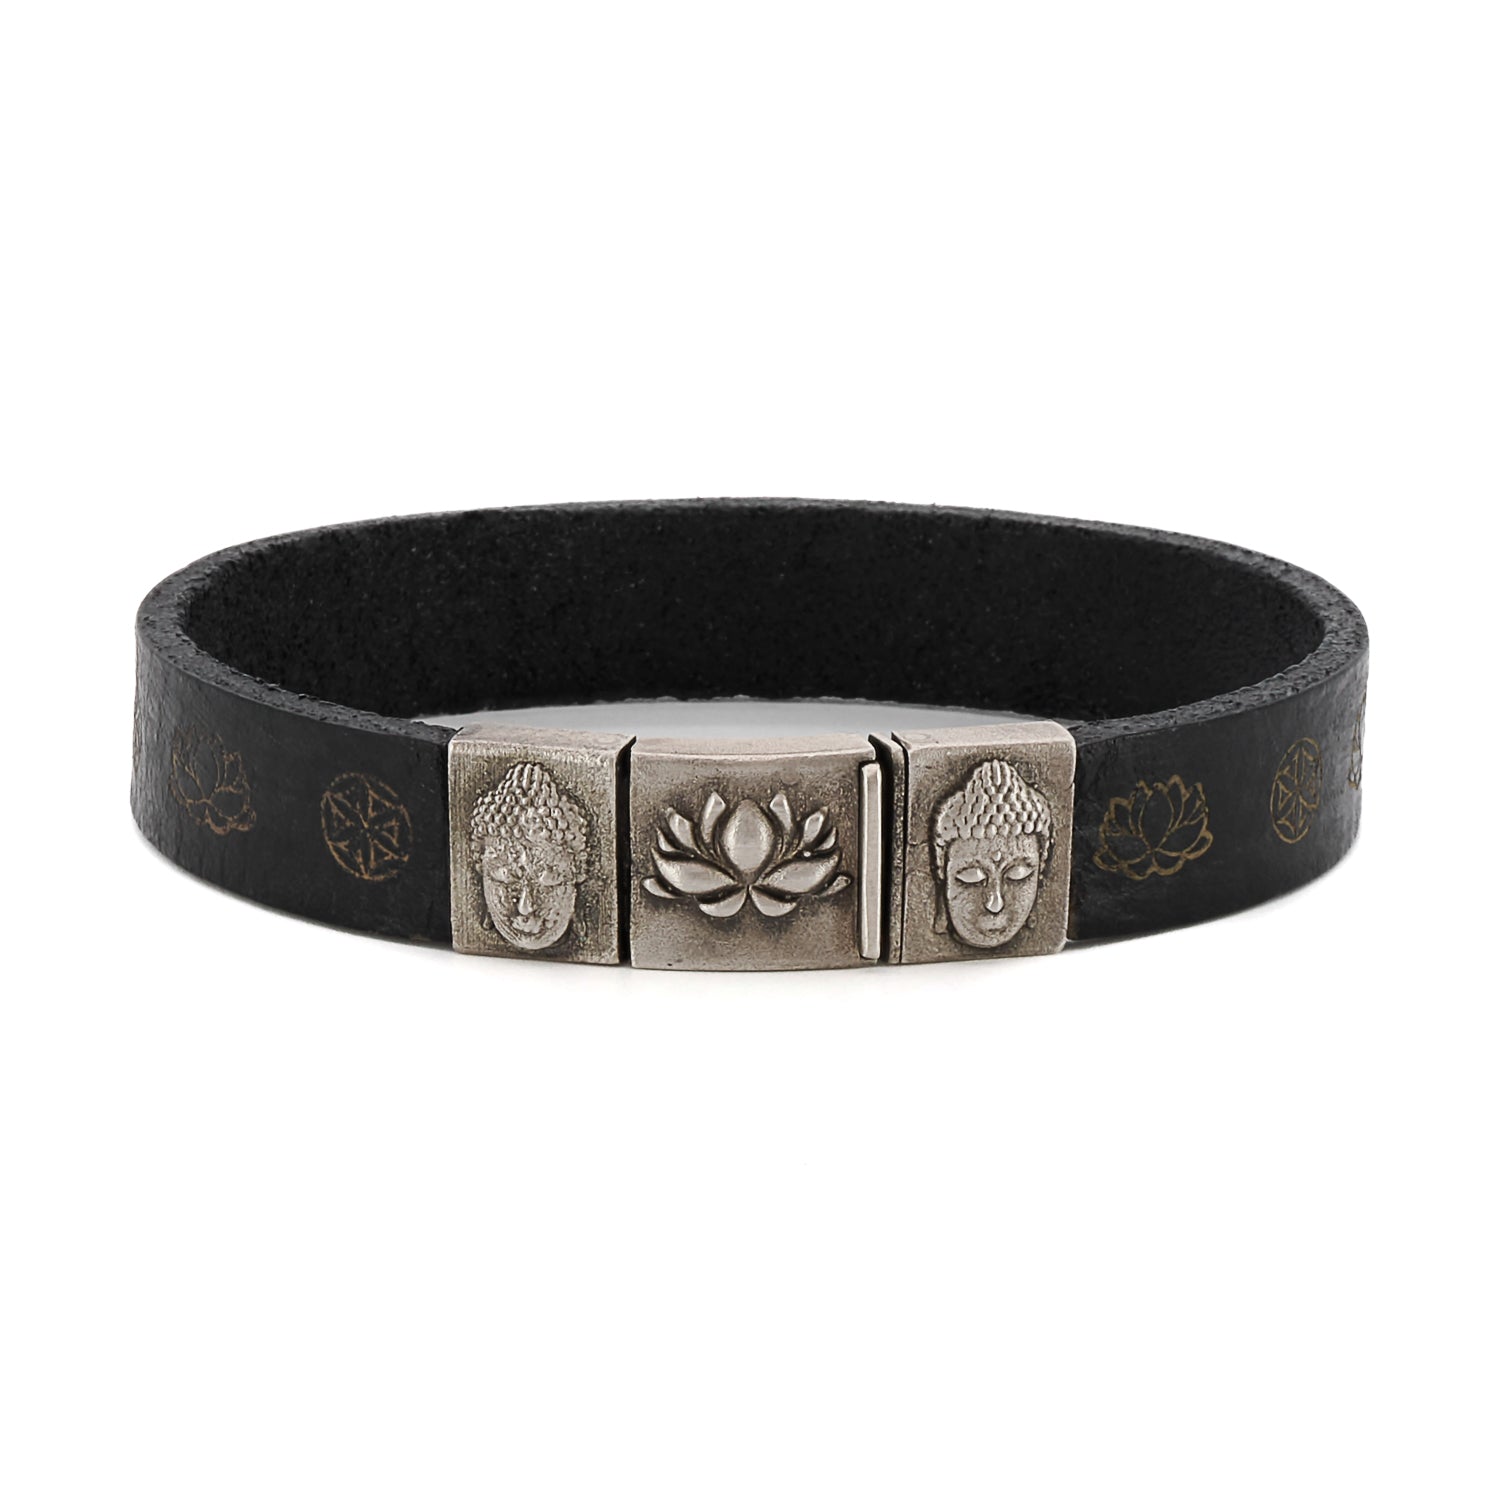 Spiritual Buddha and Lotus Bangle Bracelet - Handcrafted with Laser-Engraved Leather and Sterling Silver.